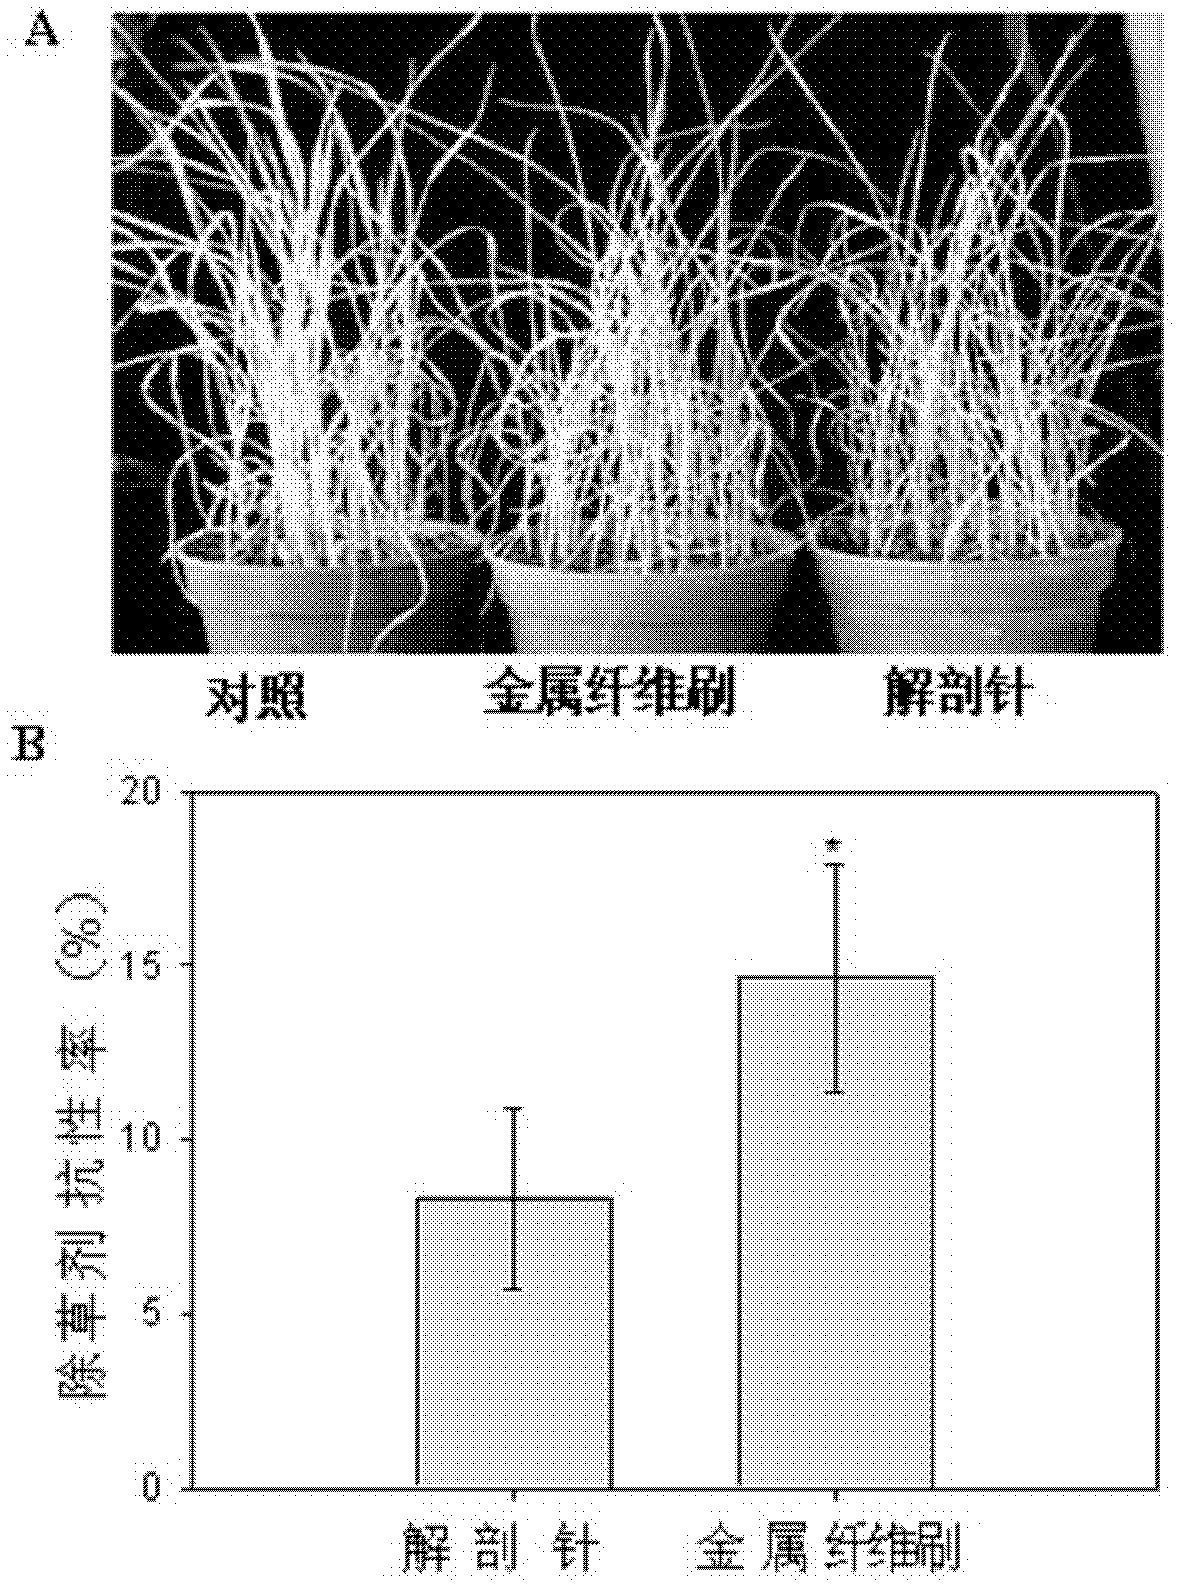 Method for transforming stem tips of plants and special tool thereof